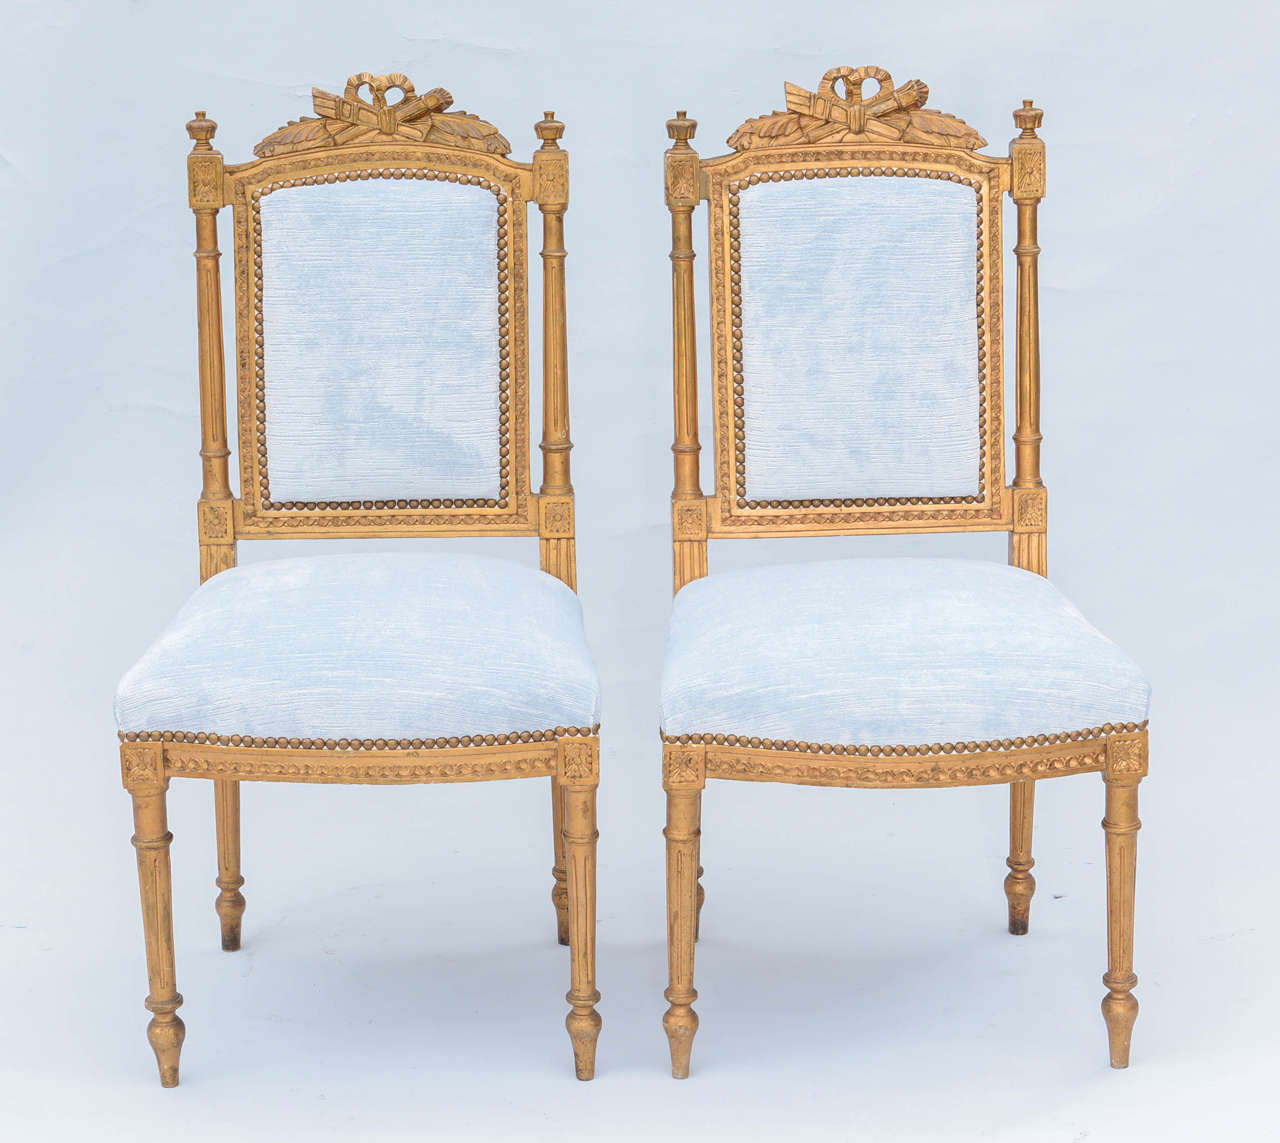 Pair of petite ballroom side chairs, in Louis XVI style; each having a giltwood frame, intricatedly carved crestrail, padded back flanked by fluted stiles, stuff over seat, on bowed apron, raised on round stop-fluted legs, ending in touipe feet.